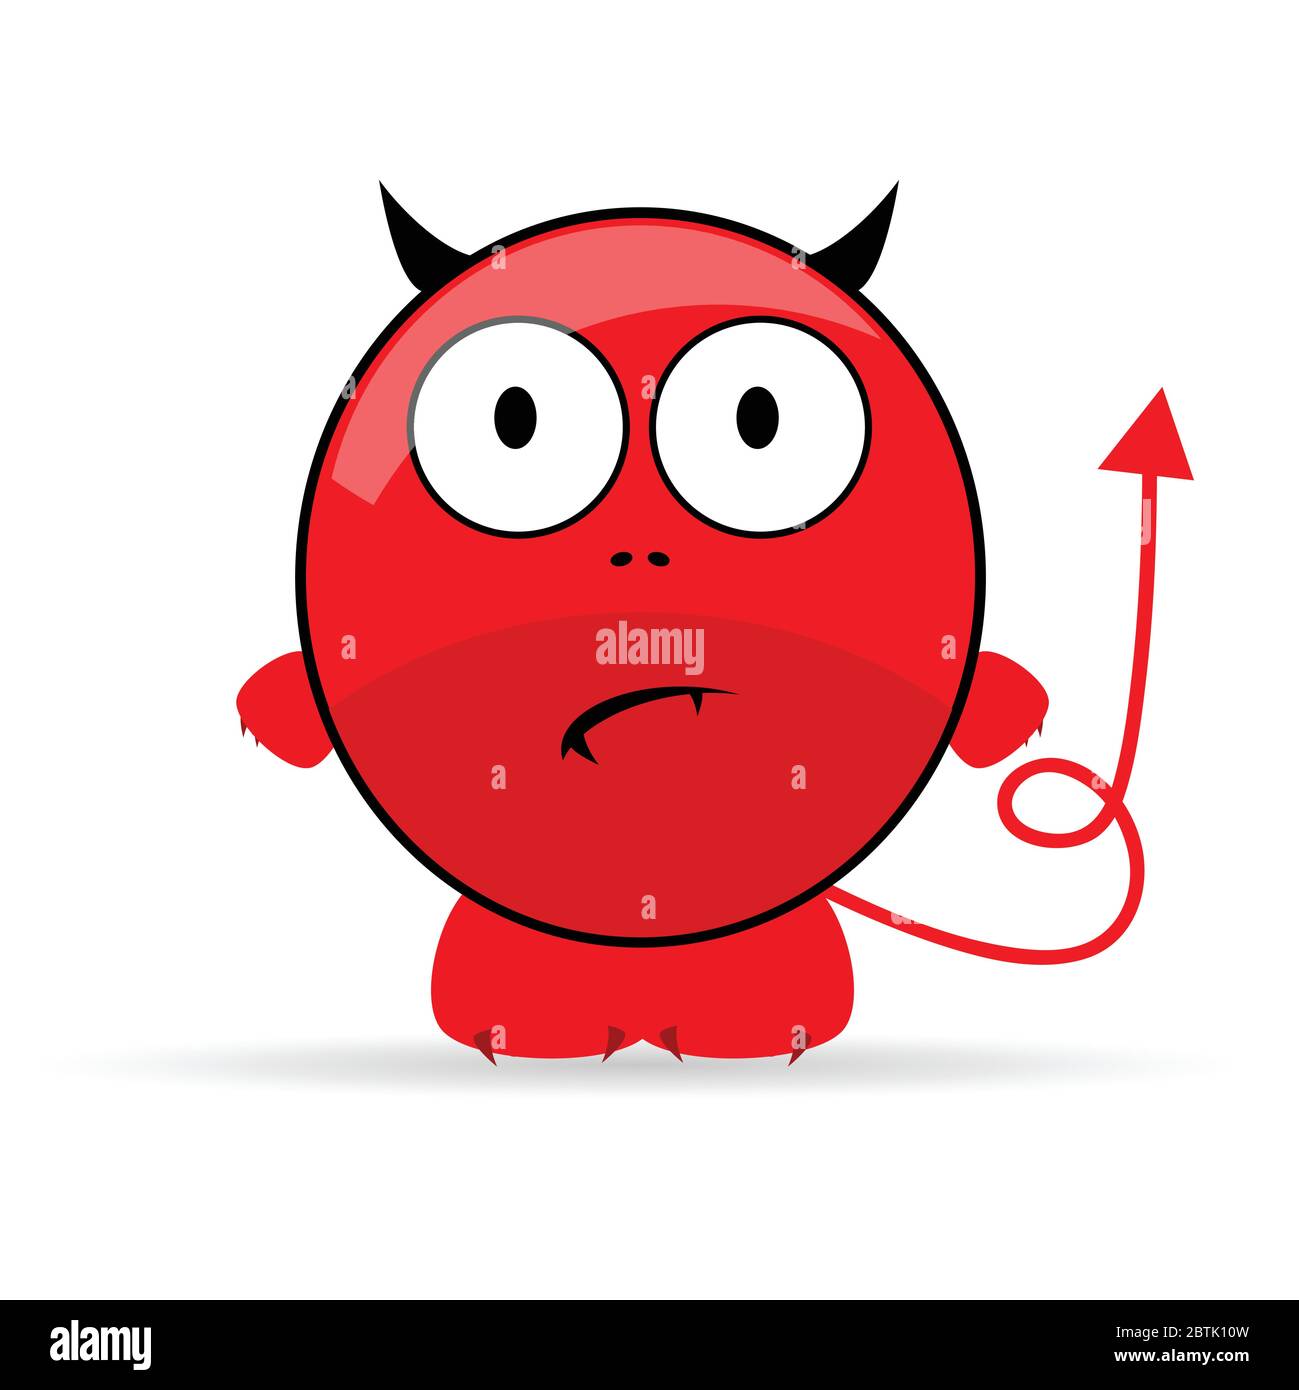 sweet and cute devil vector illustration Stock Vector